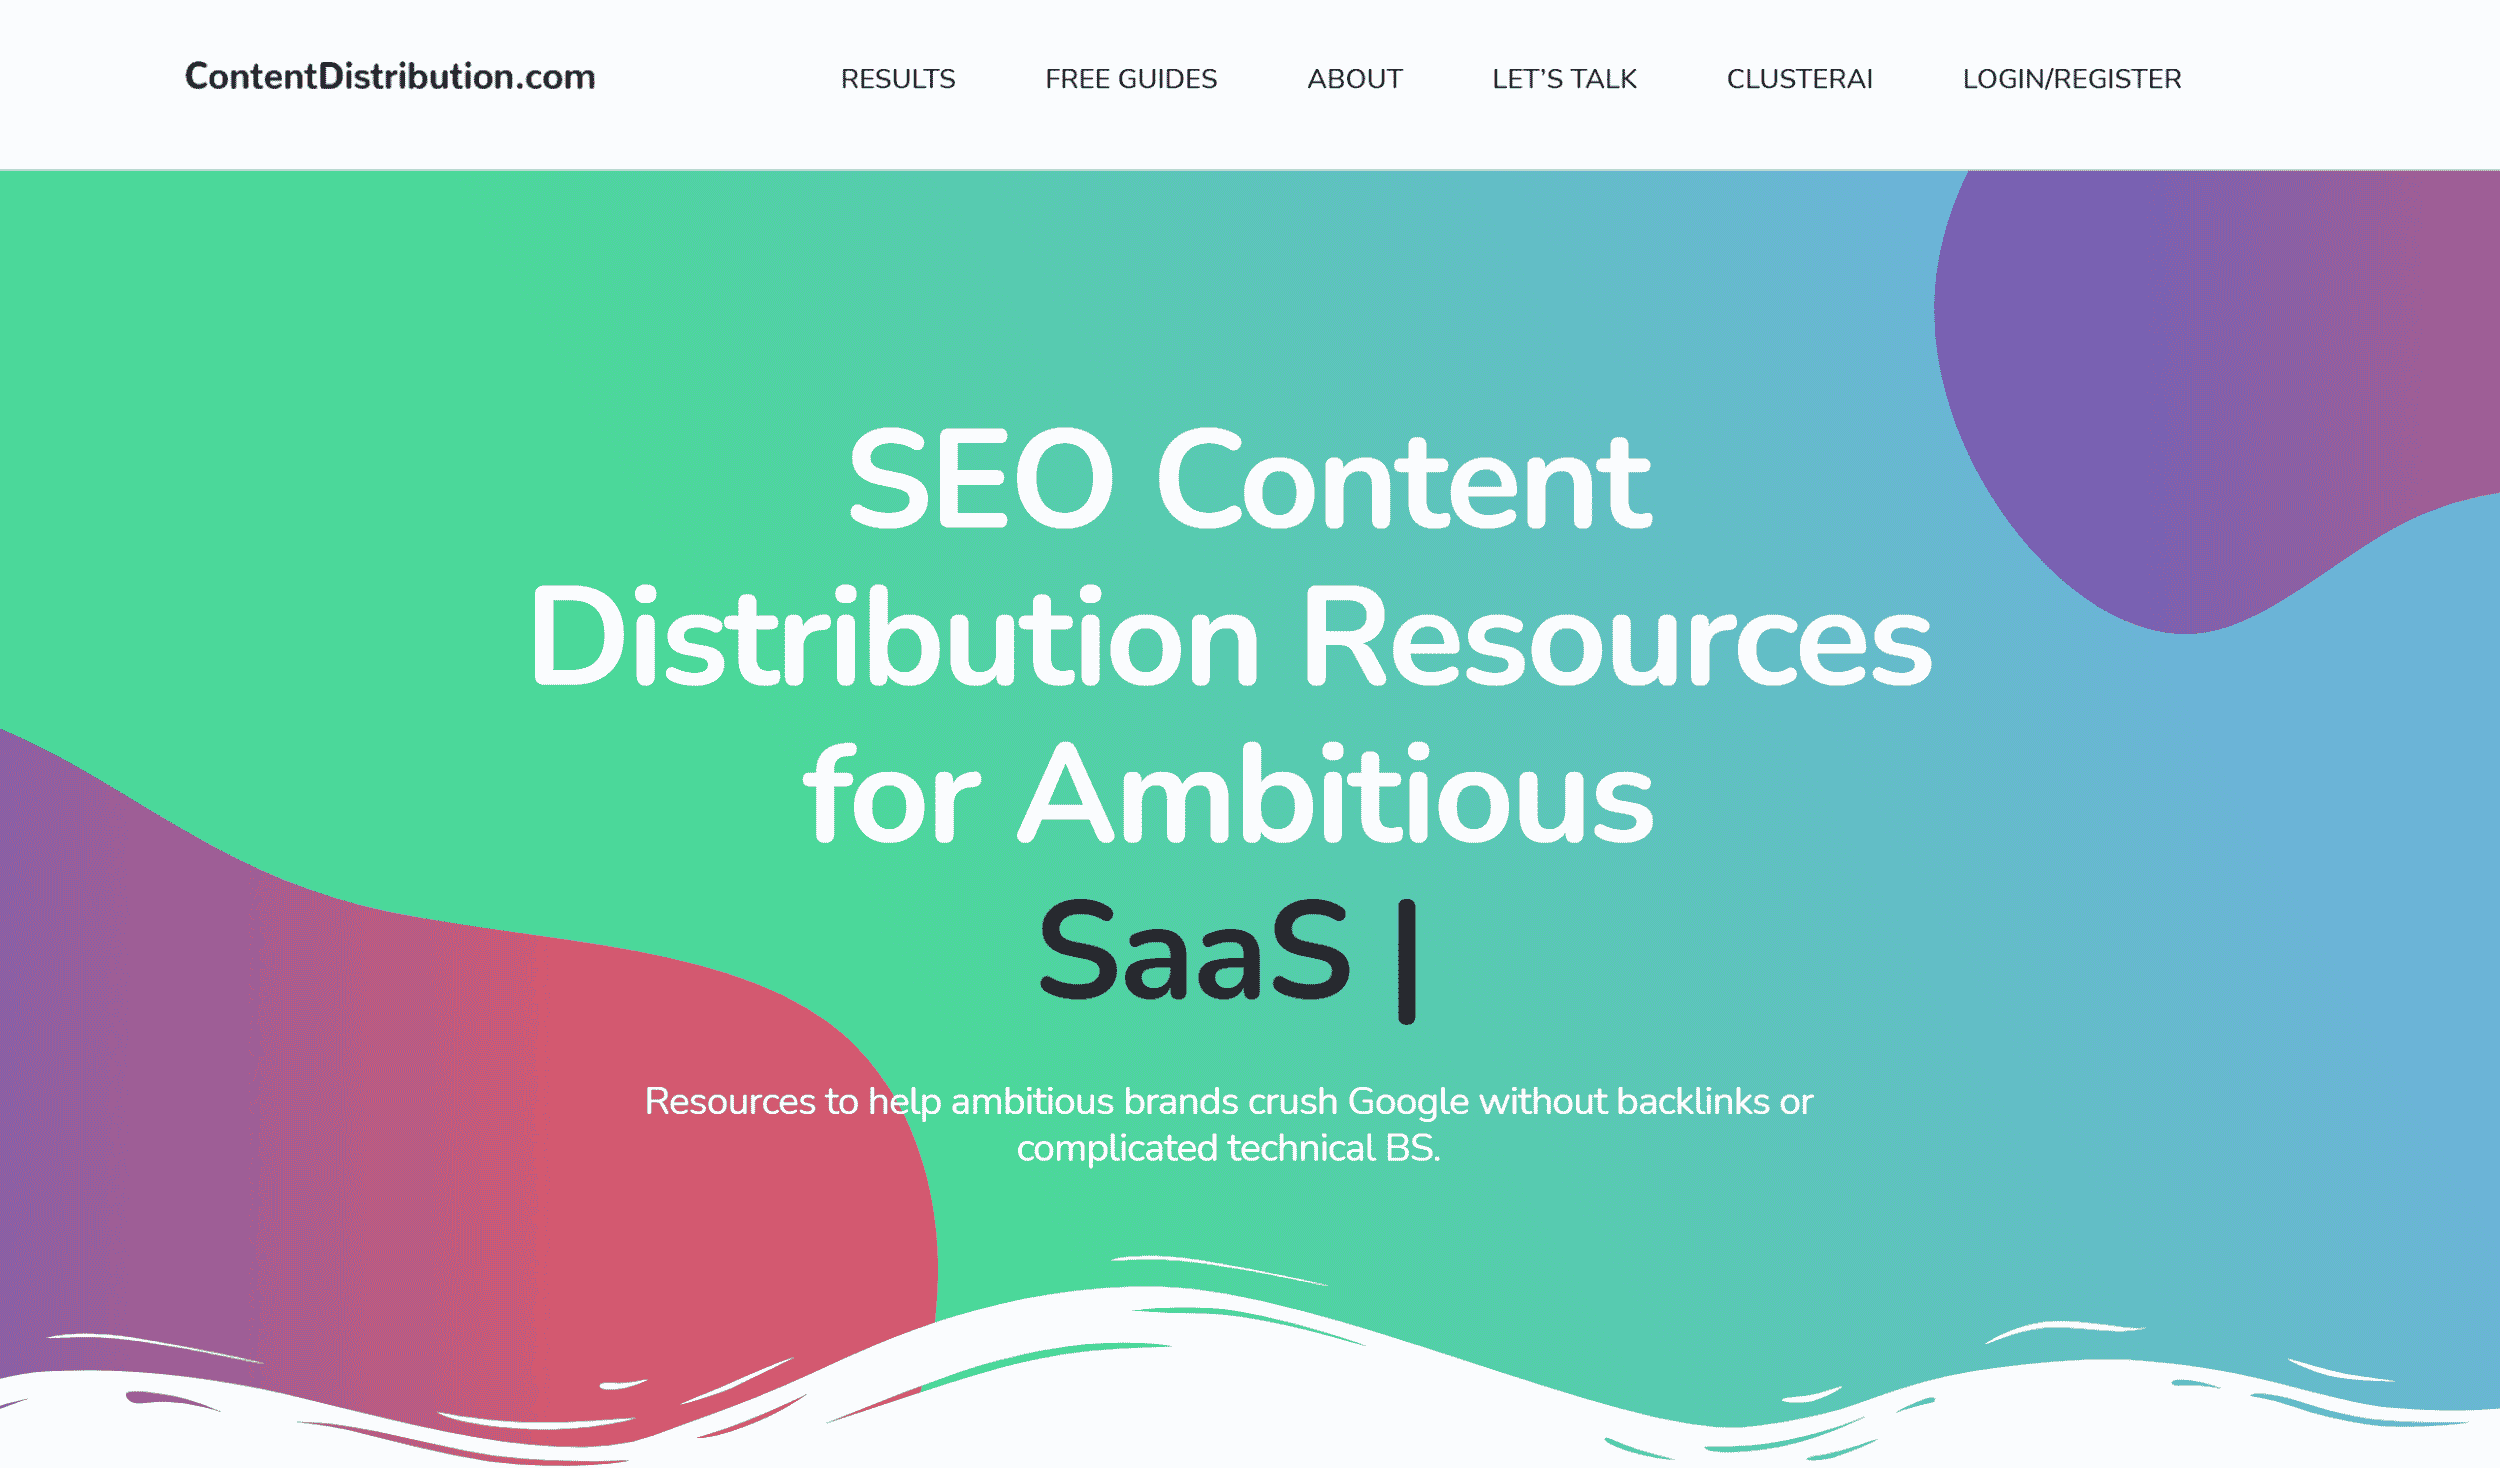 Content Distribution B2B SEO Agency website homepage